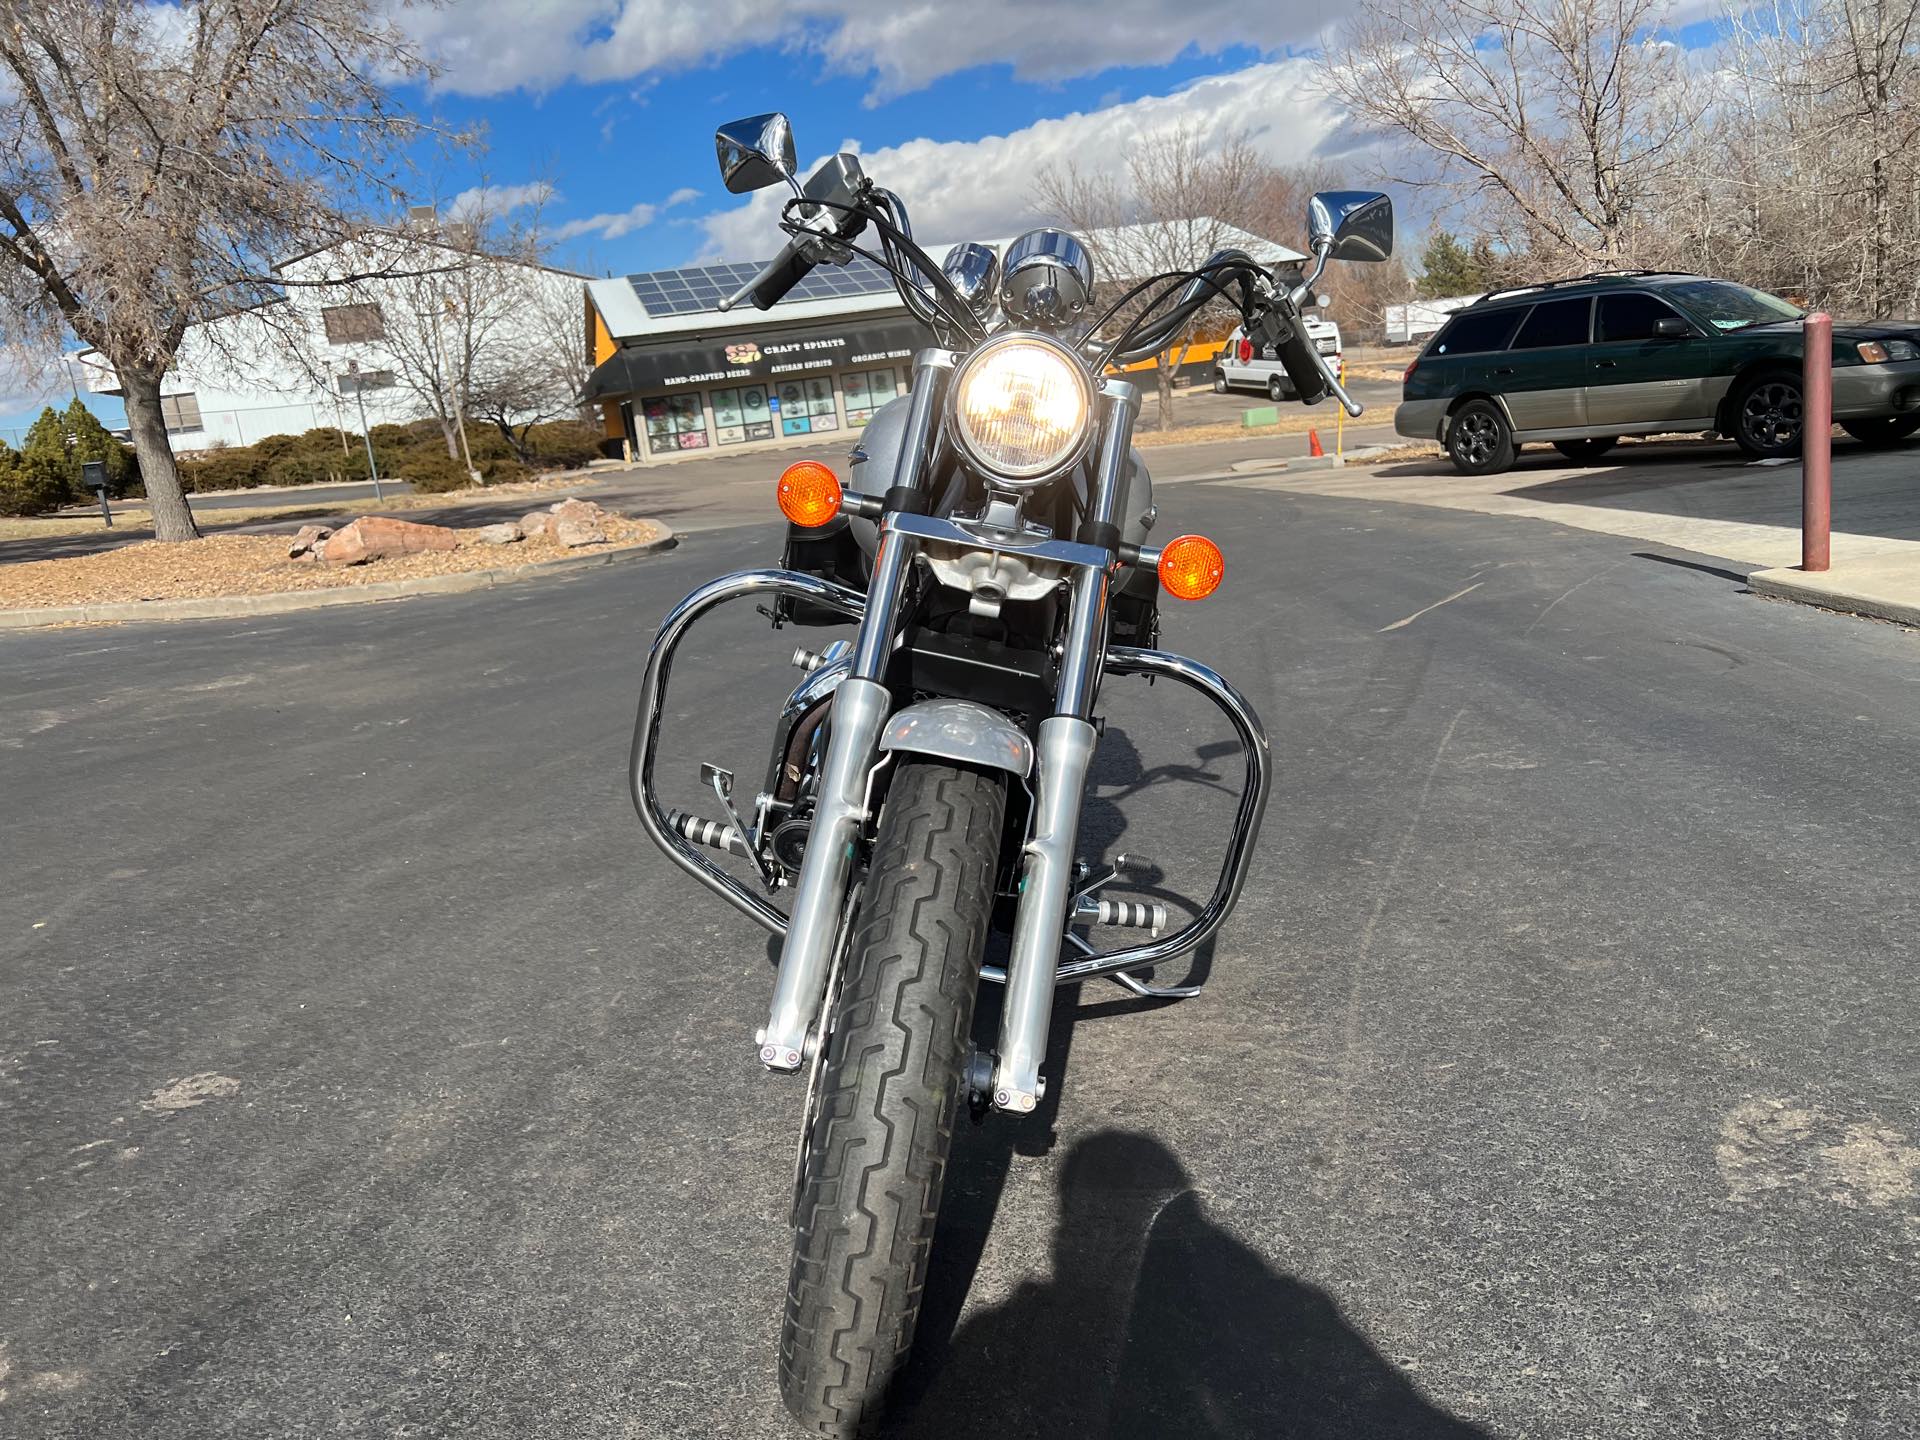 2007 Honda Shadow Spirit at Aces Motorcycles - Fort Collins